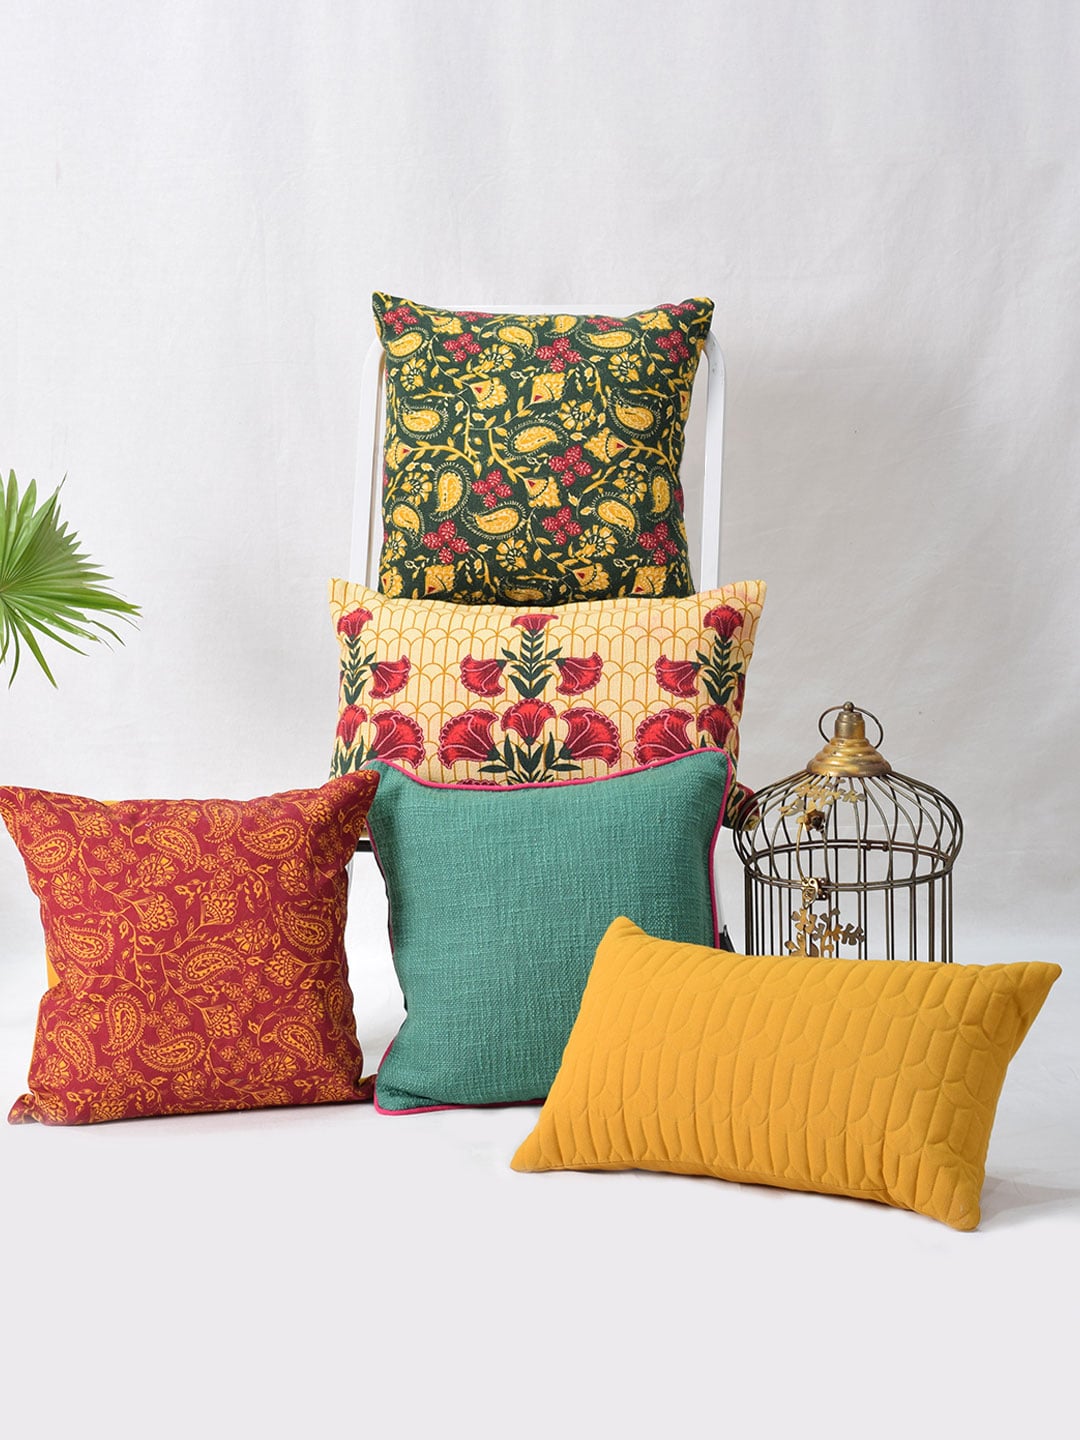 Set of 5 Botanical Garden Square and Rectangle Cotton Cushion Covers